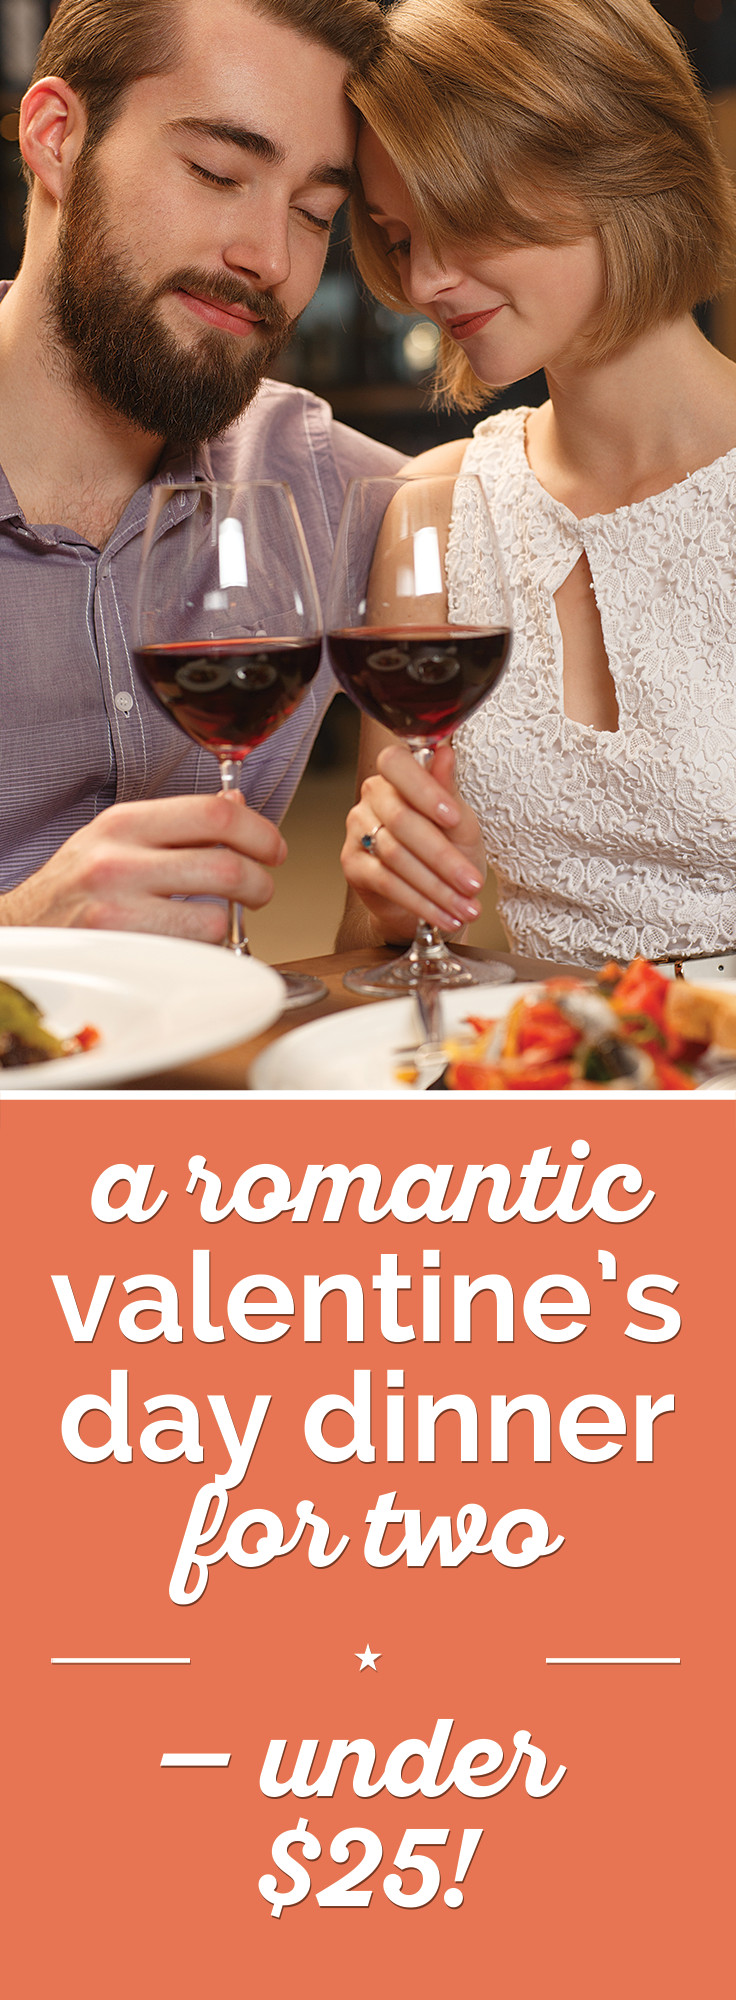 Romantic Dinners For Valentines Day
 A Romantic Valentine s Day Dinner for Two — Under $25